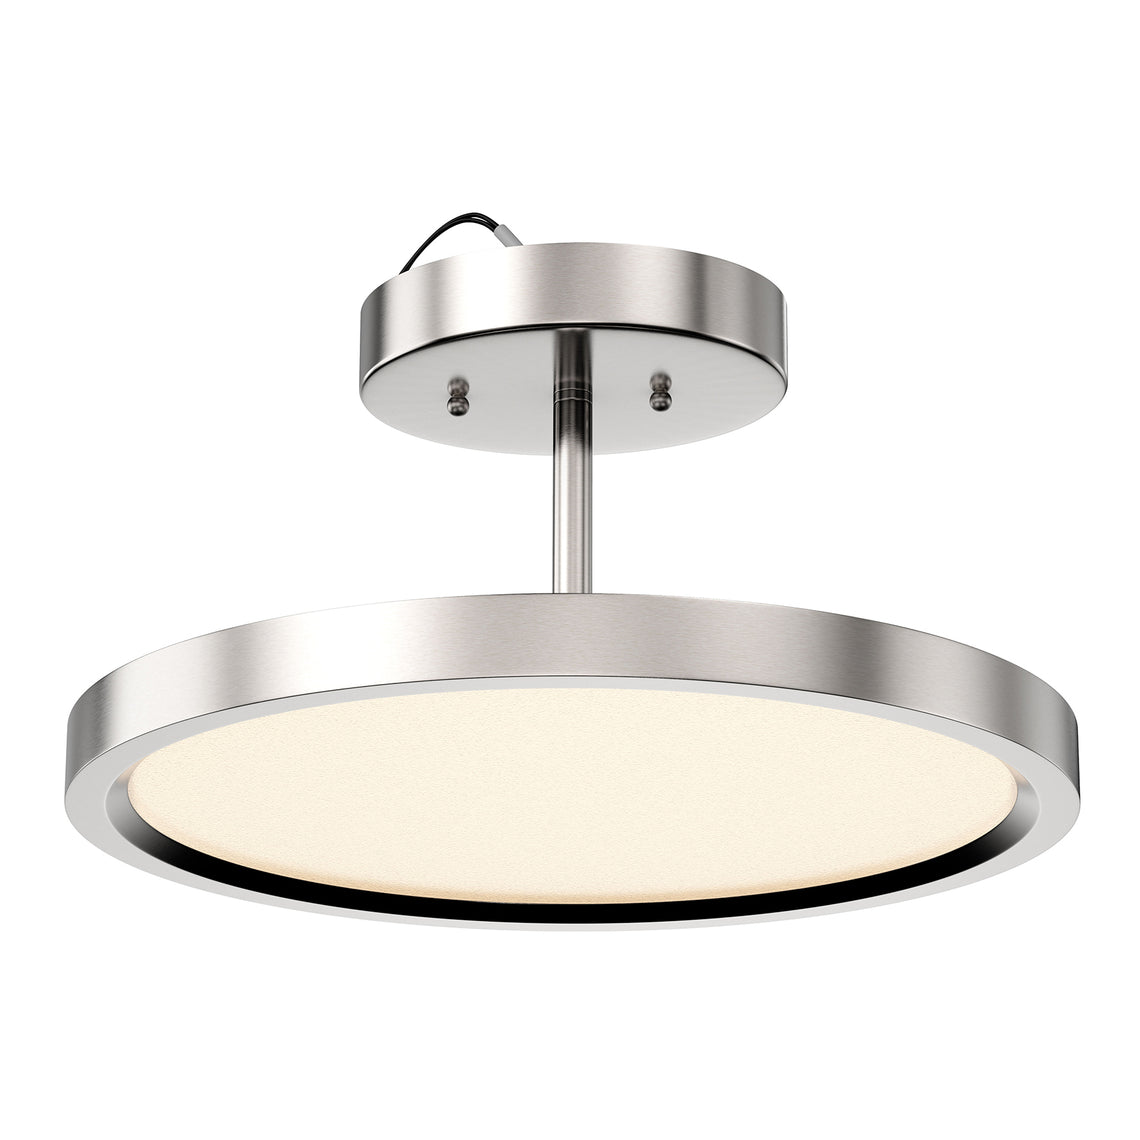 LED Semi-Flush Mount Light, 28W, 1950 Lumens, Dimmable, Round Close To Ceiling Lights